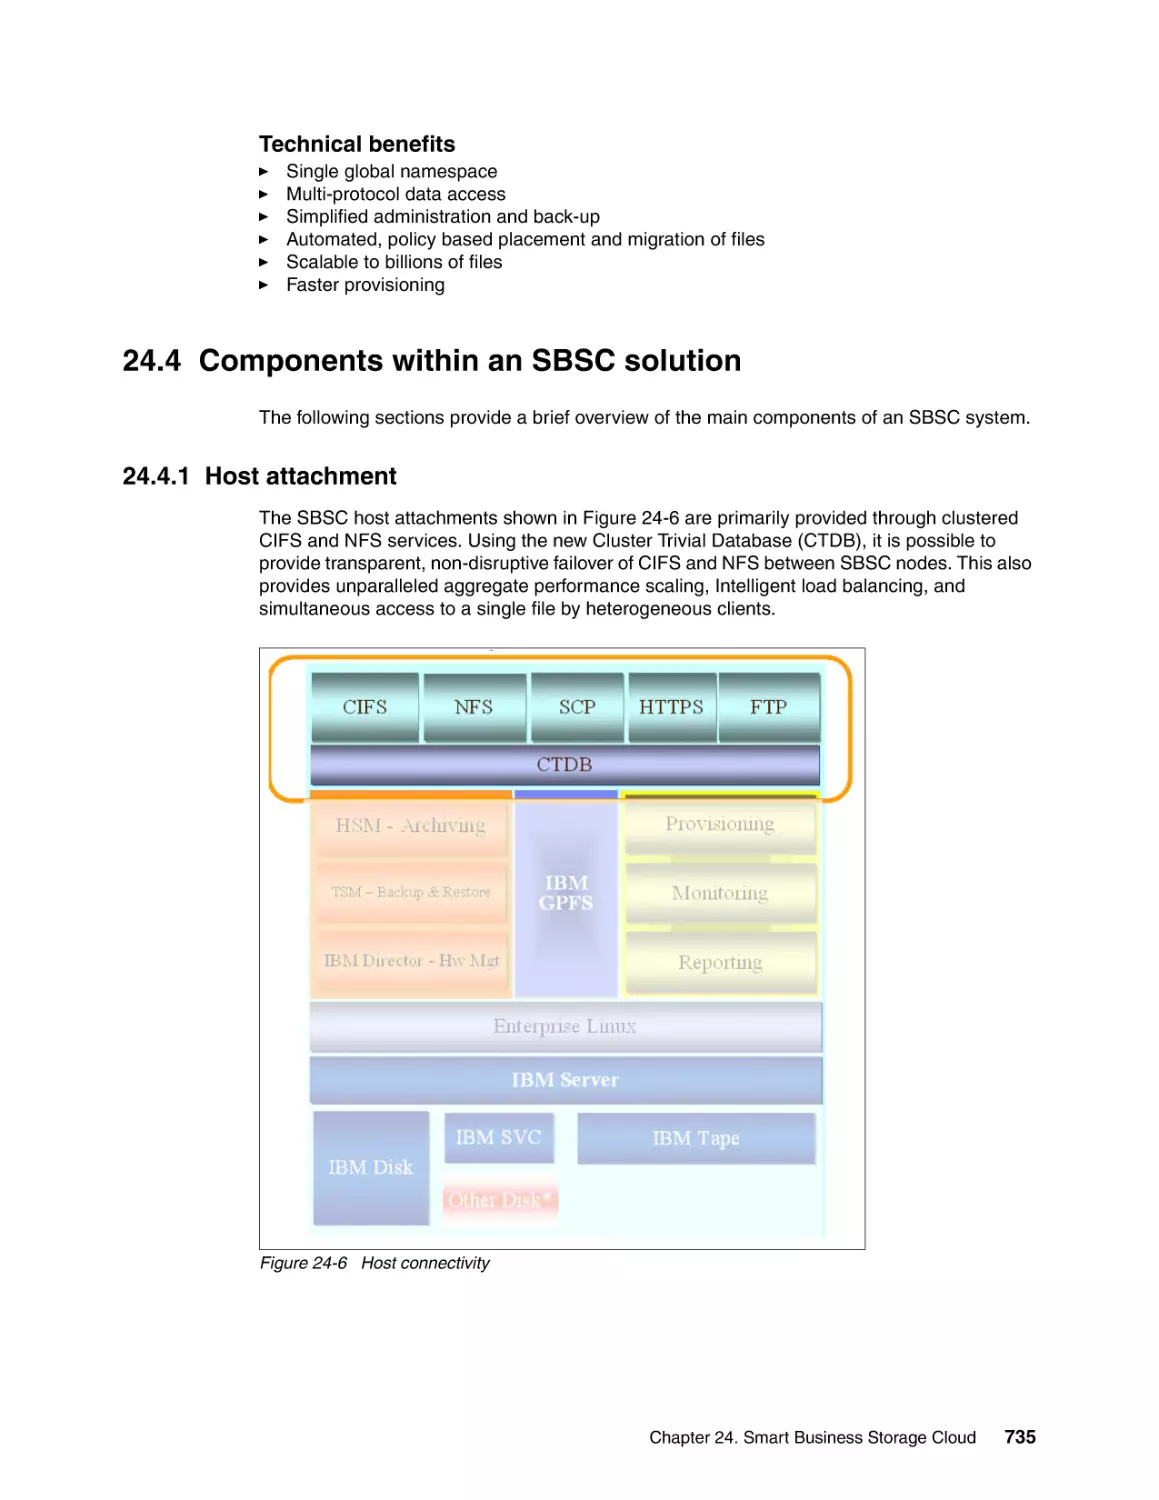 24.4 Components within an SBSC solution
24.4.1 Host attachment